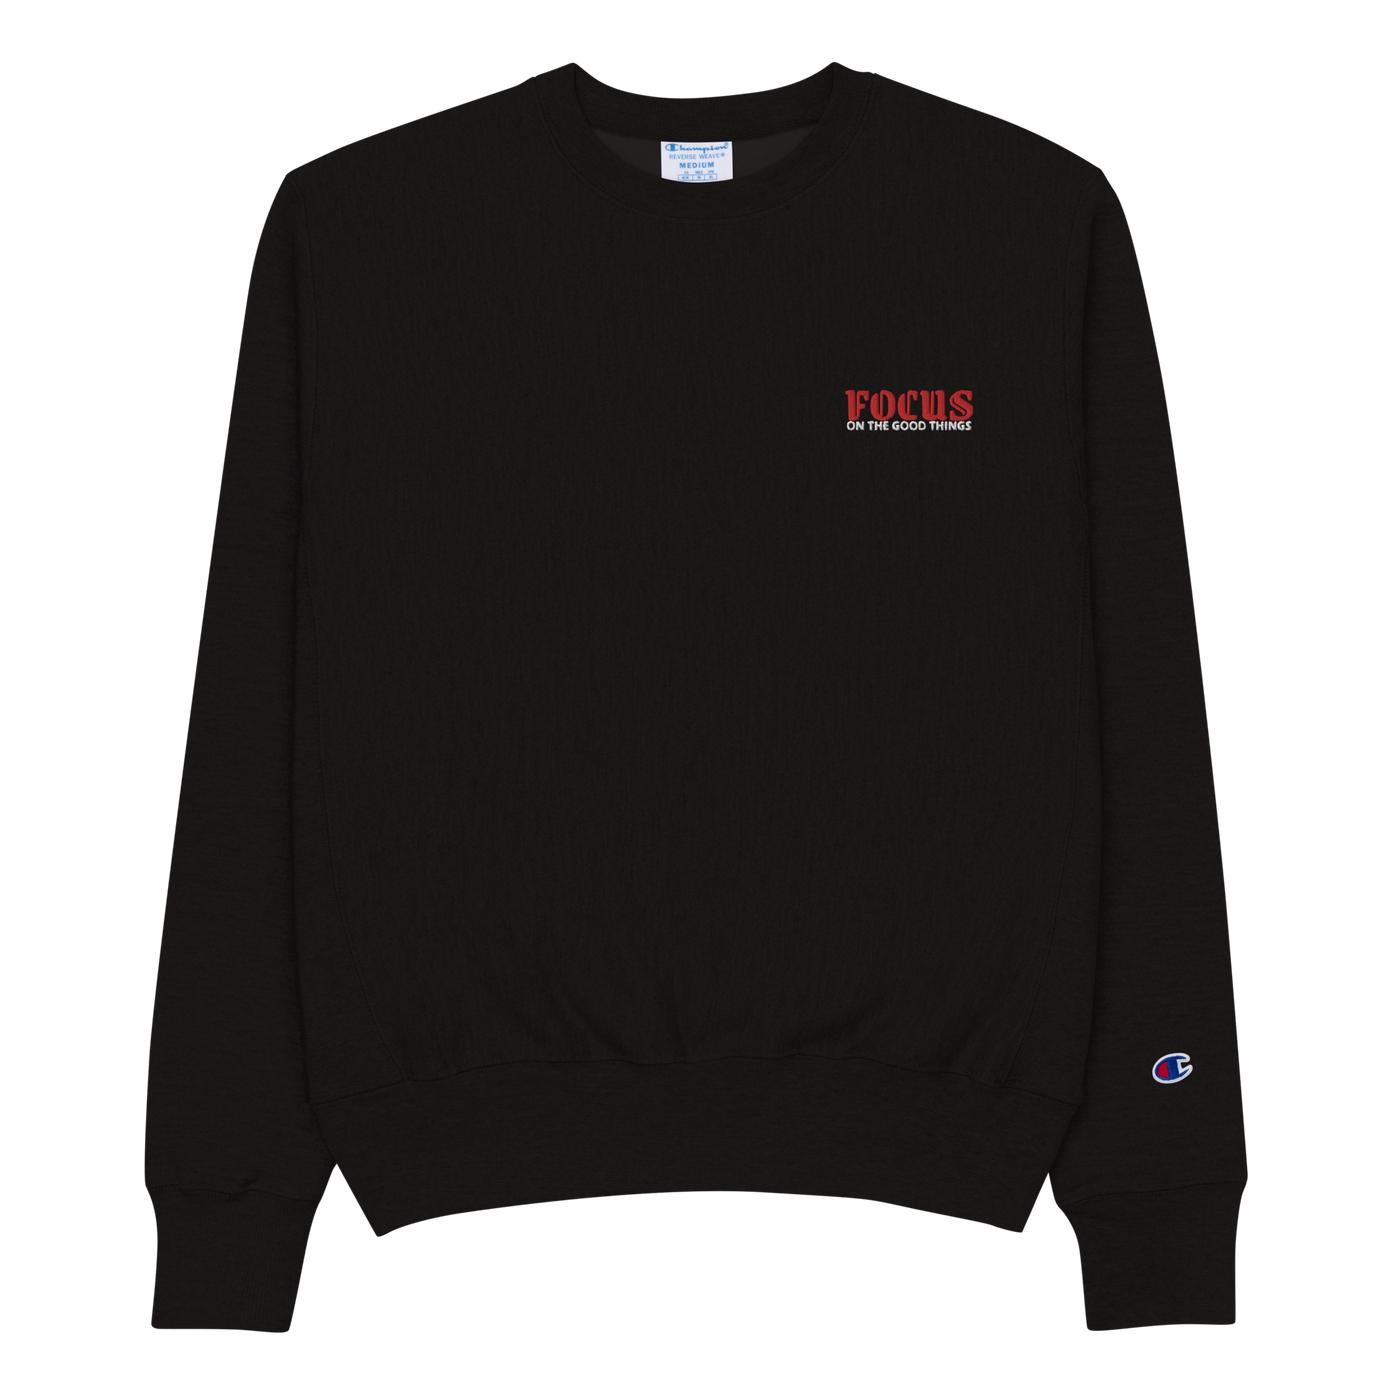 Men’s Champion Embroidered Black Sweatshirt - Focus on the Good Things